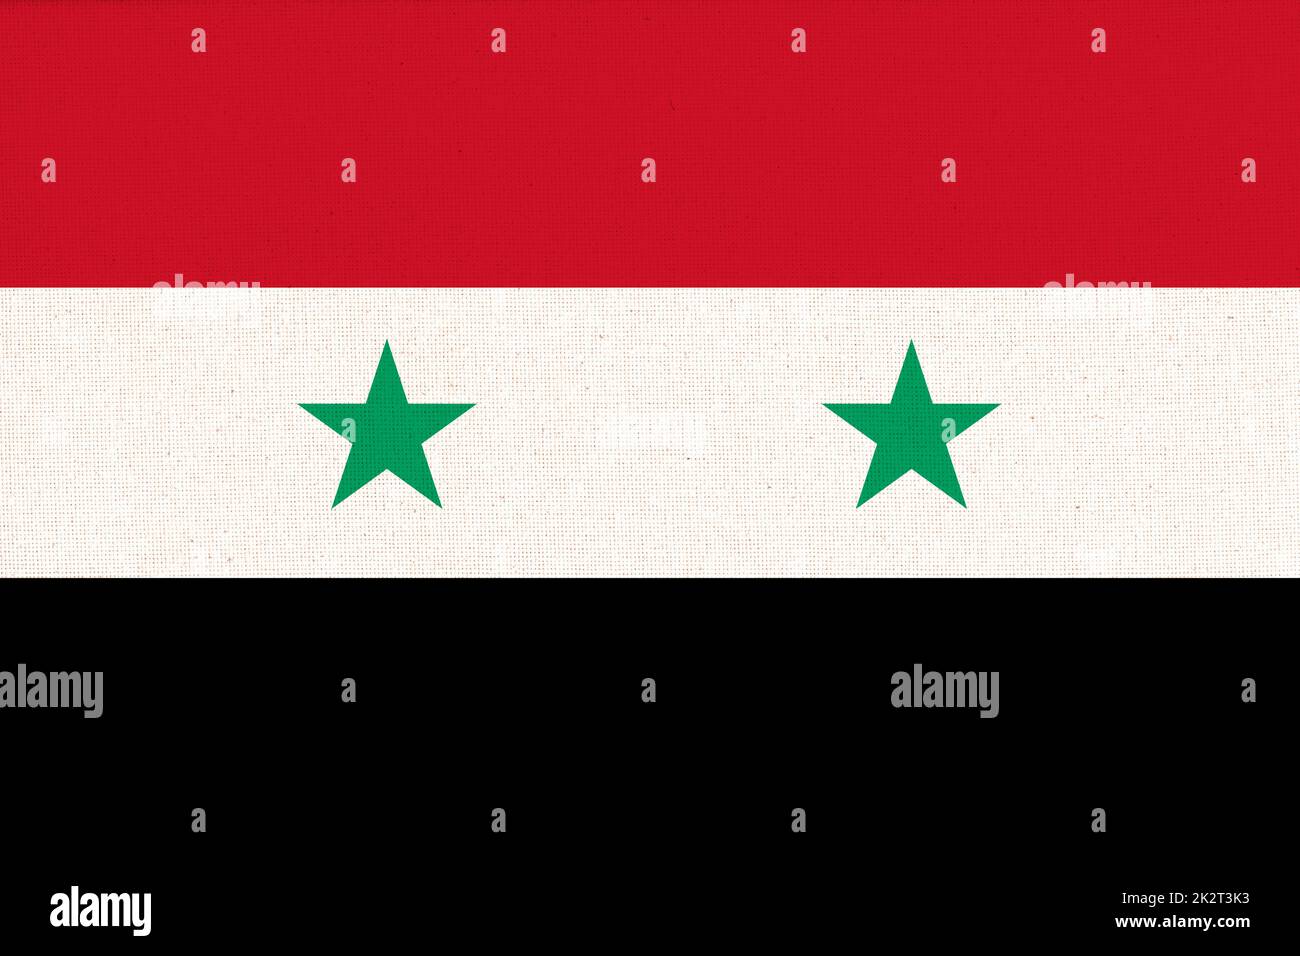 Flag of Syria. Syrian flag on fabric texture. National symbol of Syria Stock Photo